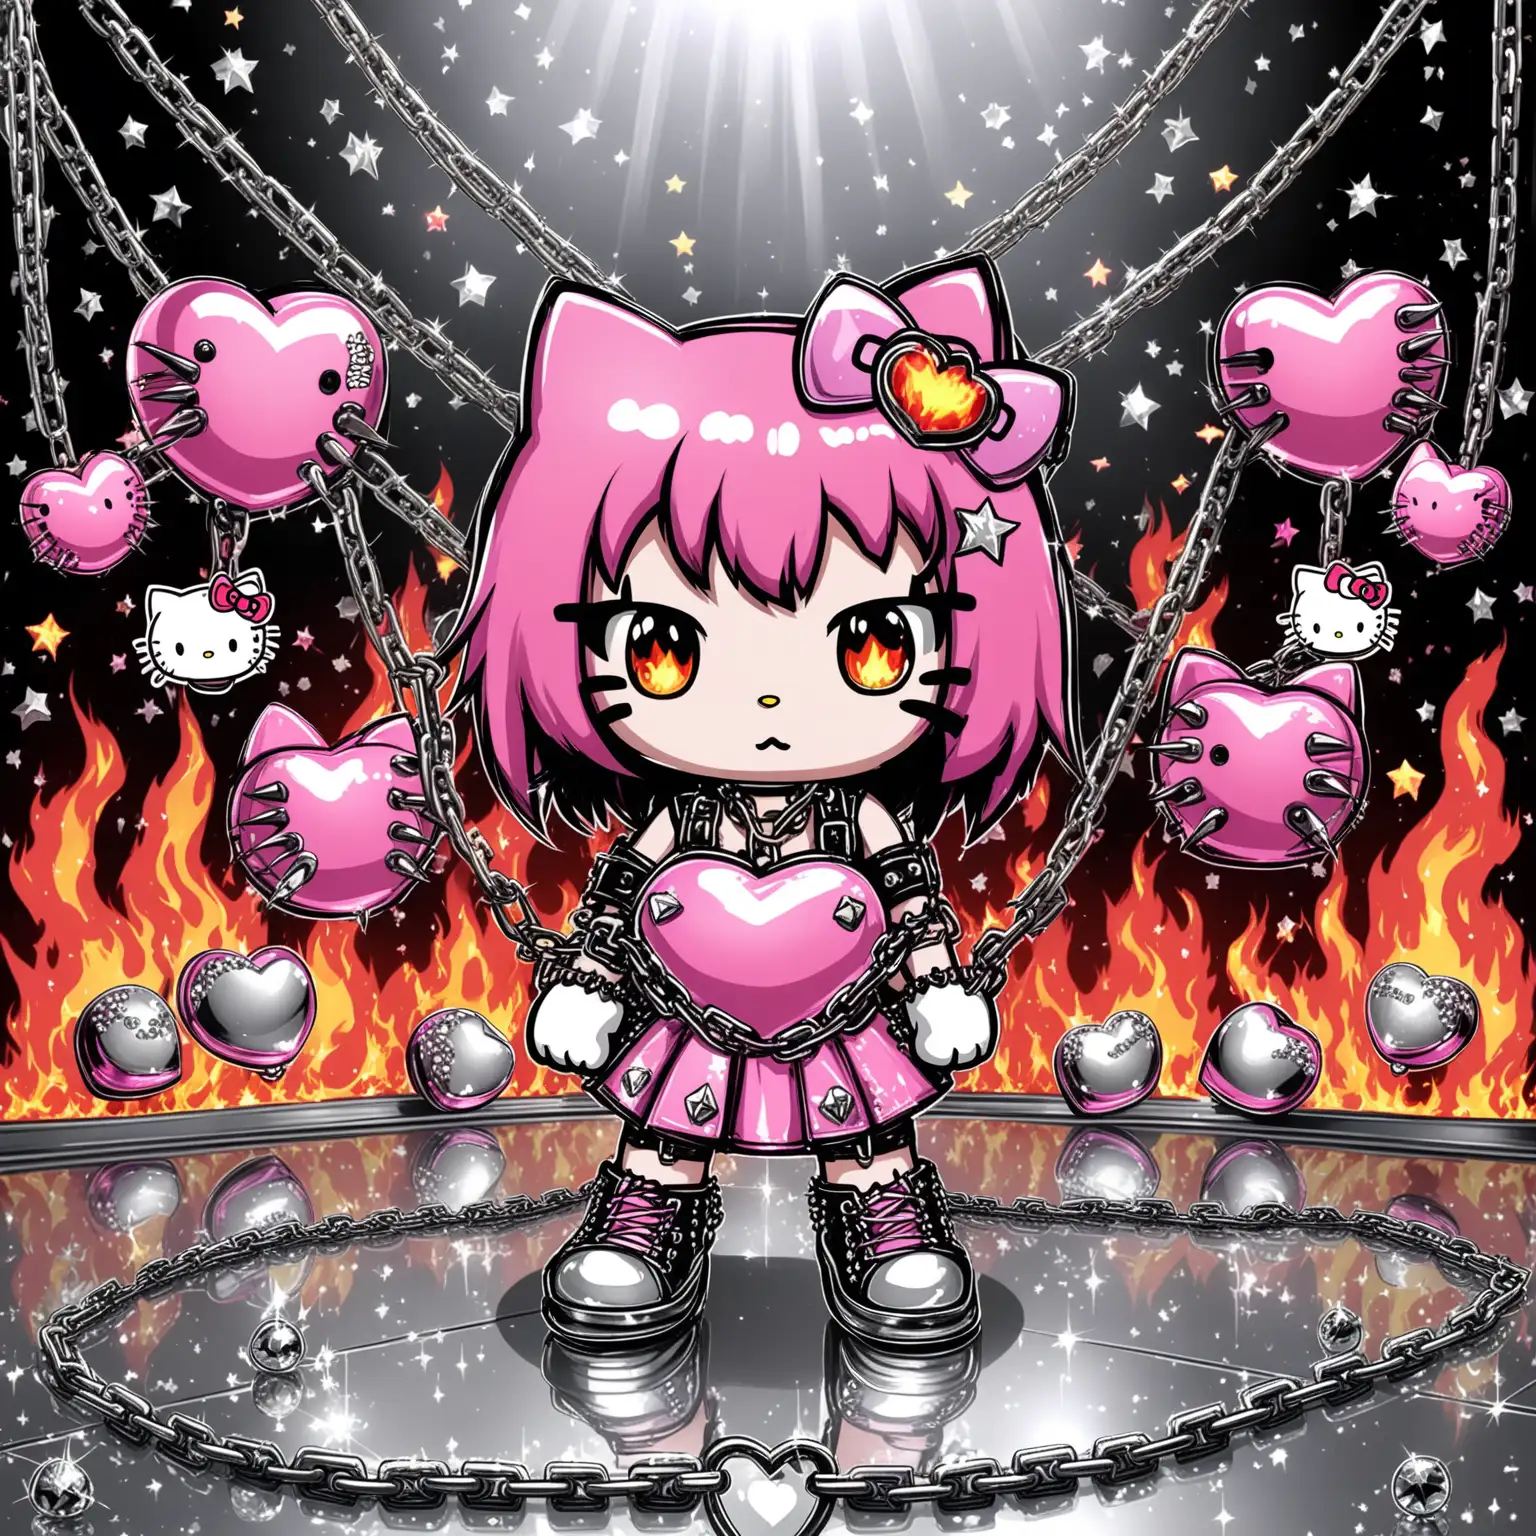 Pink Hello Kitty, looking flirtatious in chains and spikes, with diamonds on the chains, on silver reflective floor, with heart shaped bombs with spikes on fire in background, silver glitter and stars in background, badass, cute, punk rock, pretty, hello kitty